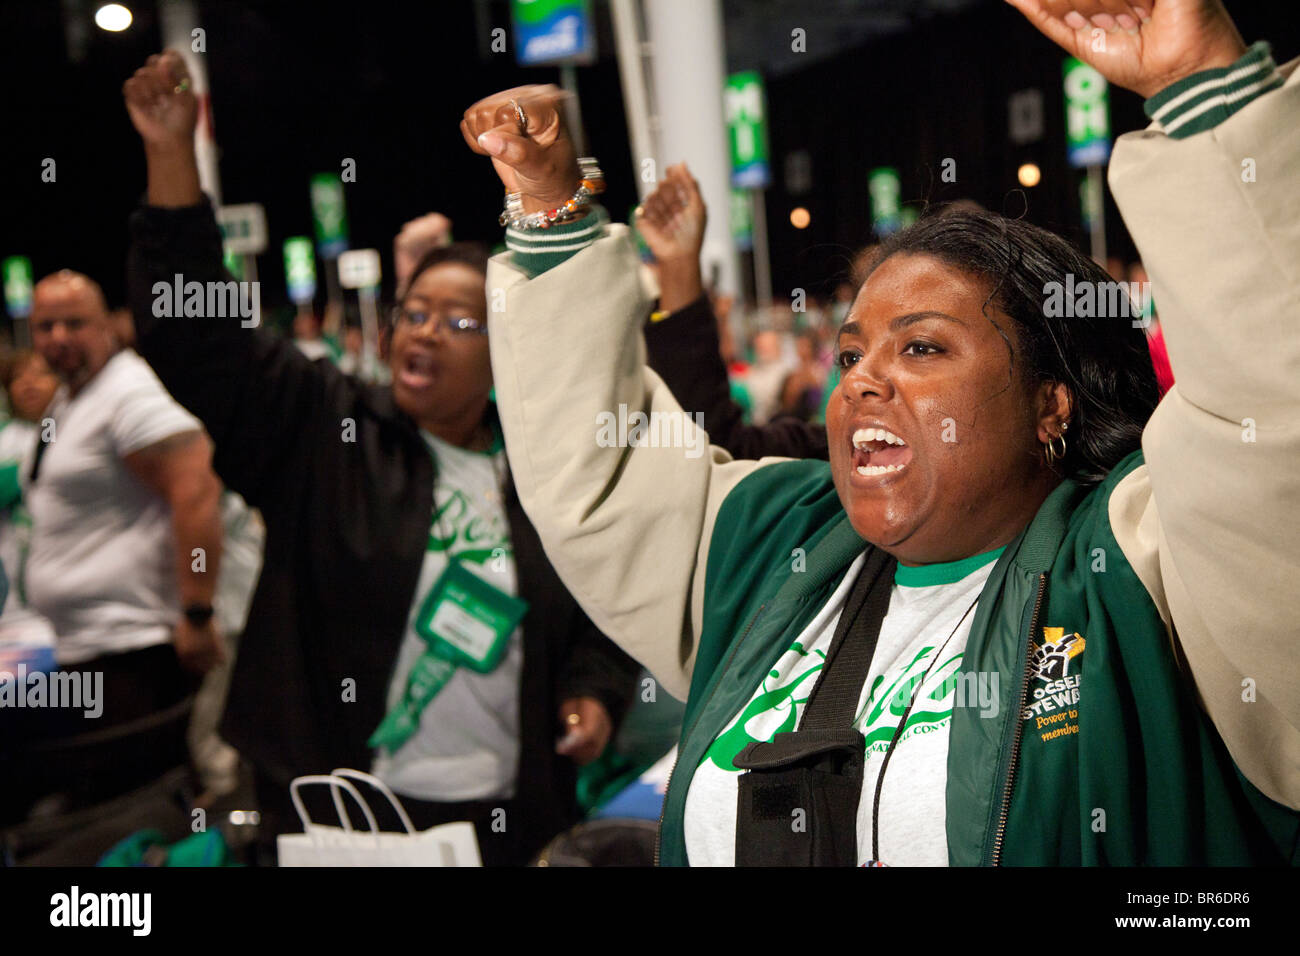 Boston, Massachusetts - A member of the public employees union AFSCME cheers during her union's convention. Stock Photo